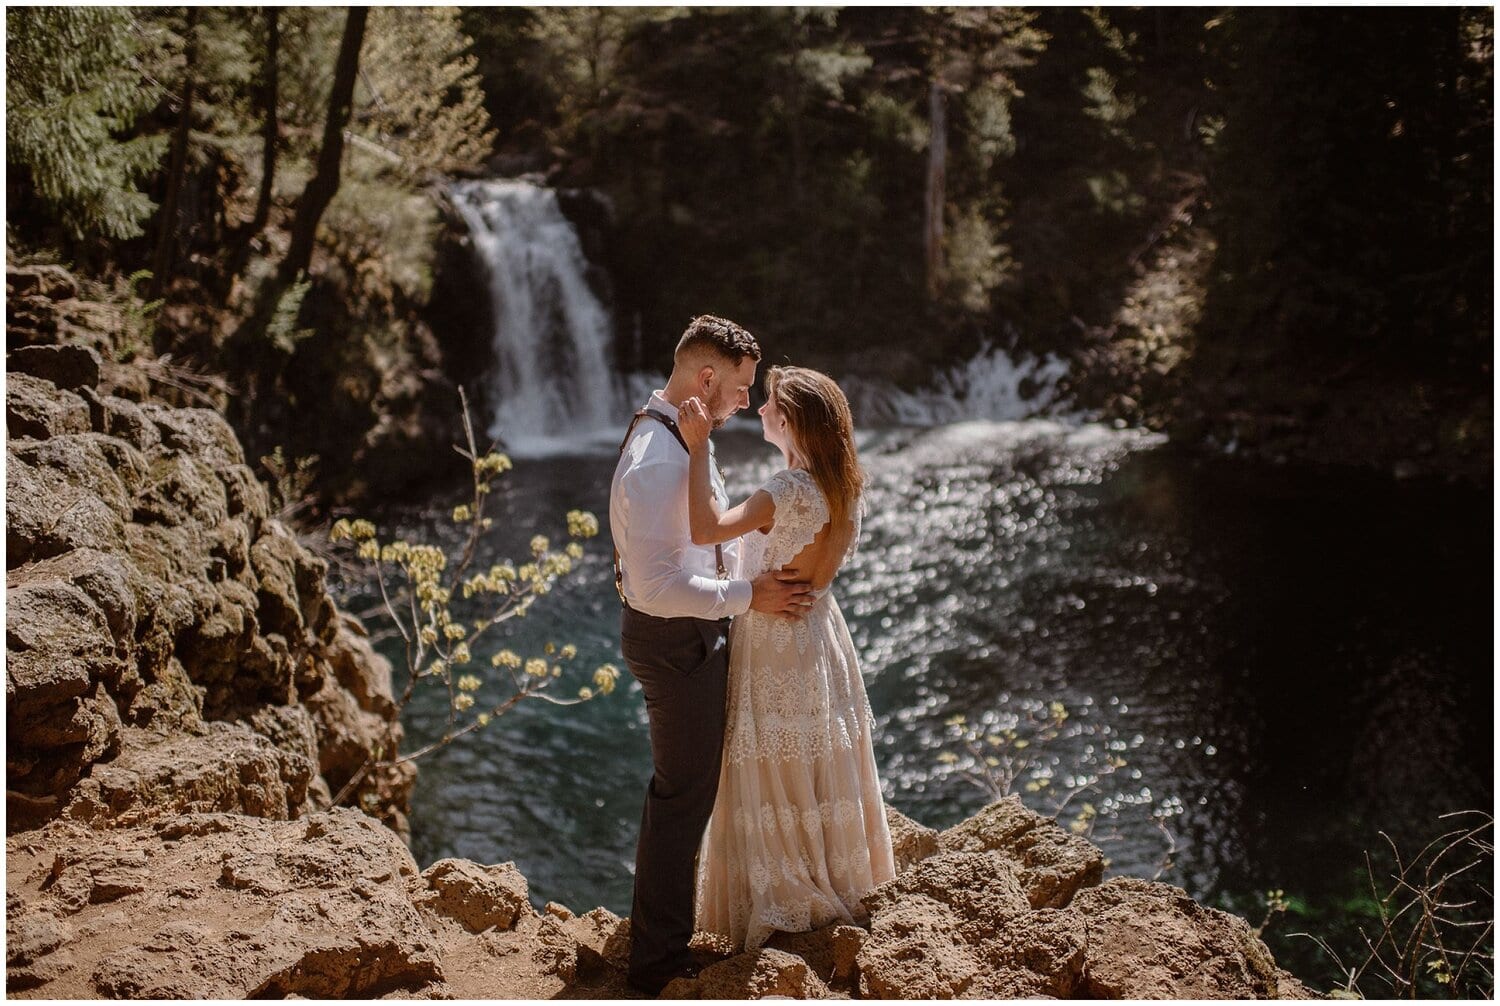 Bride and groom embrace, with waterfall behind them. 